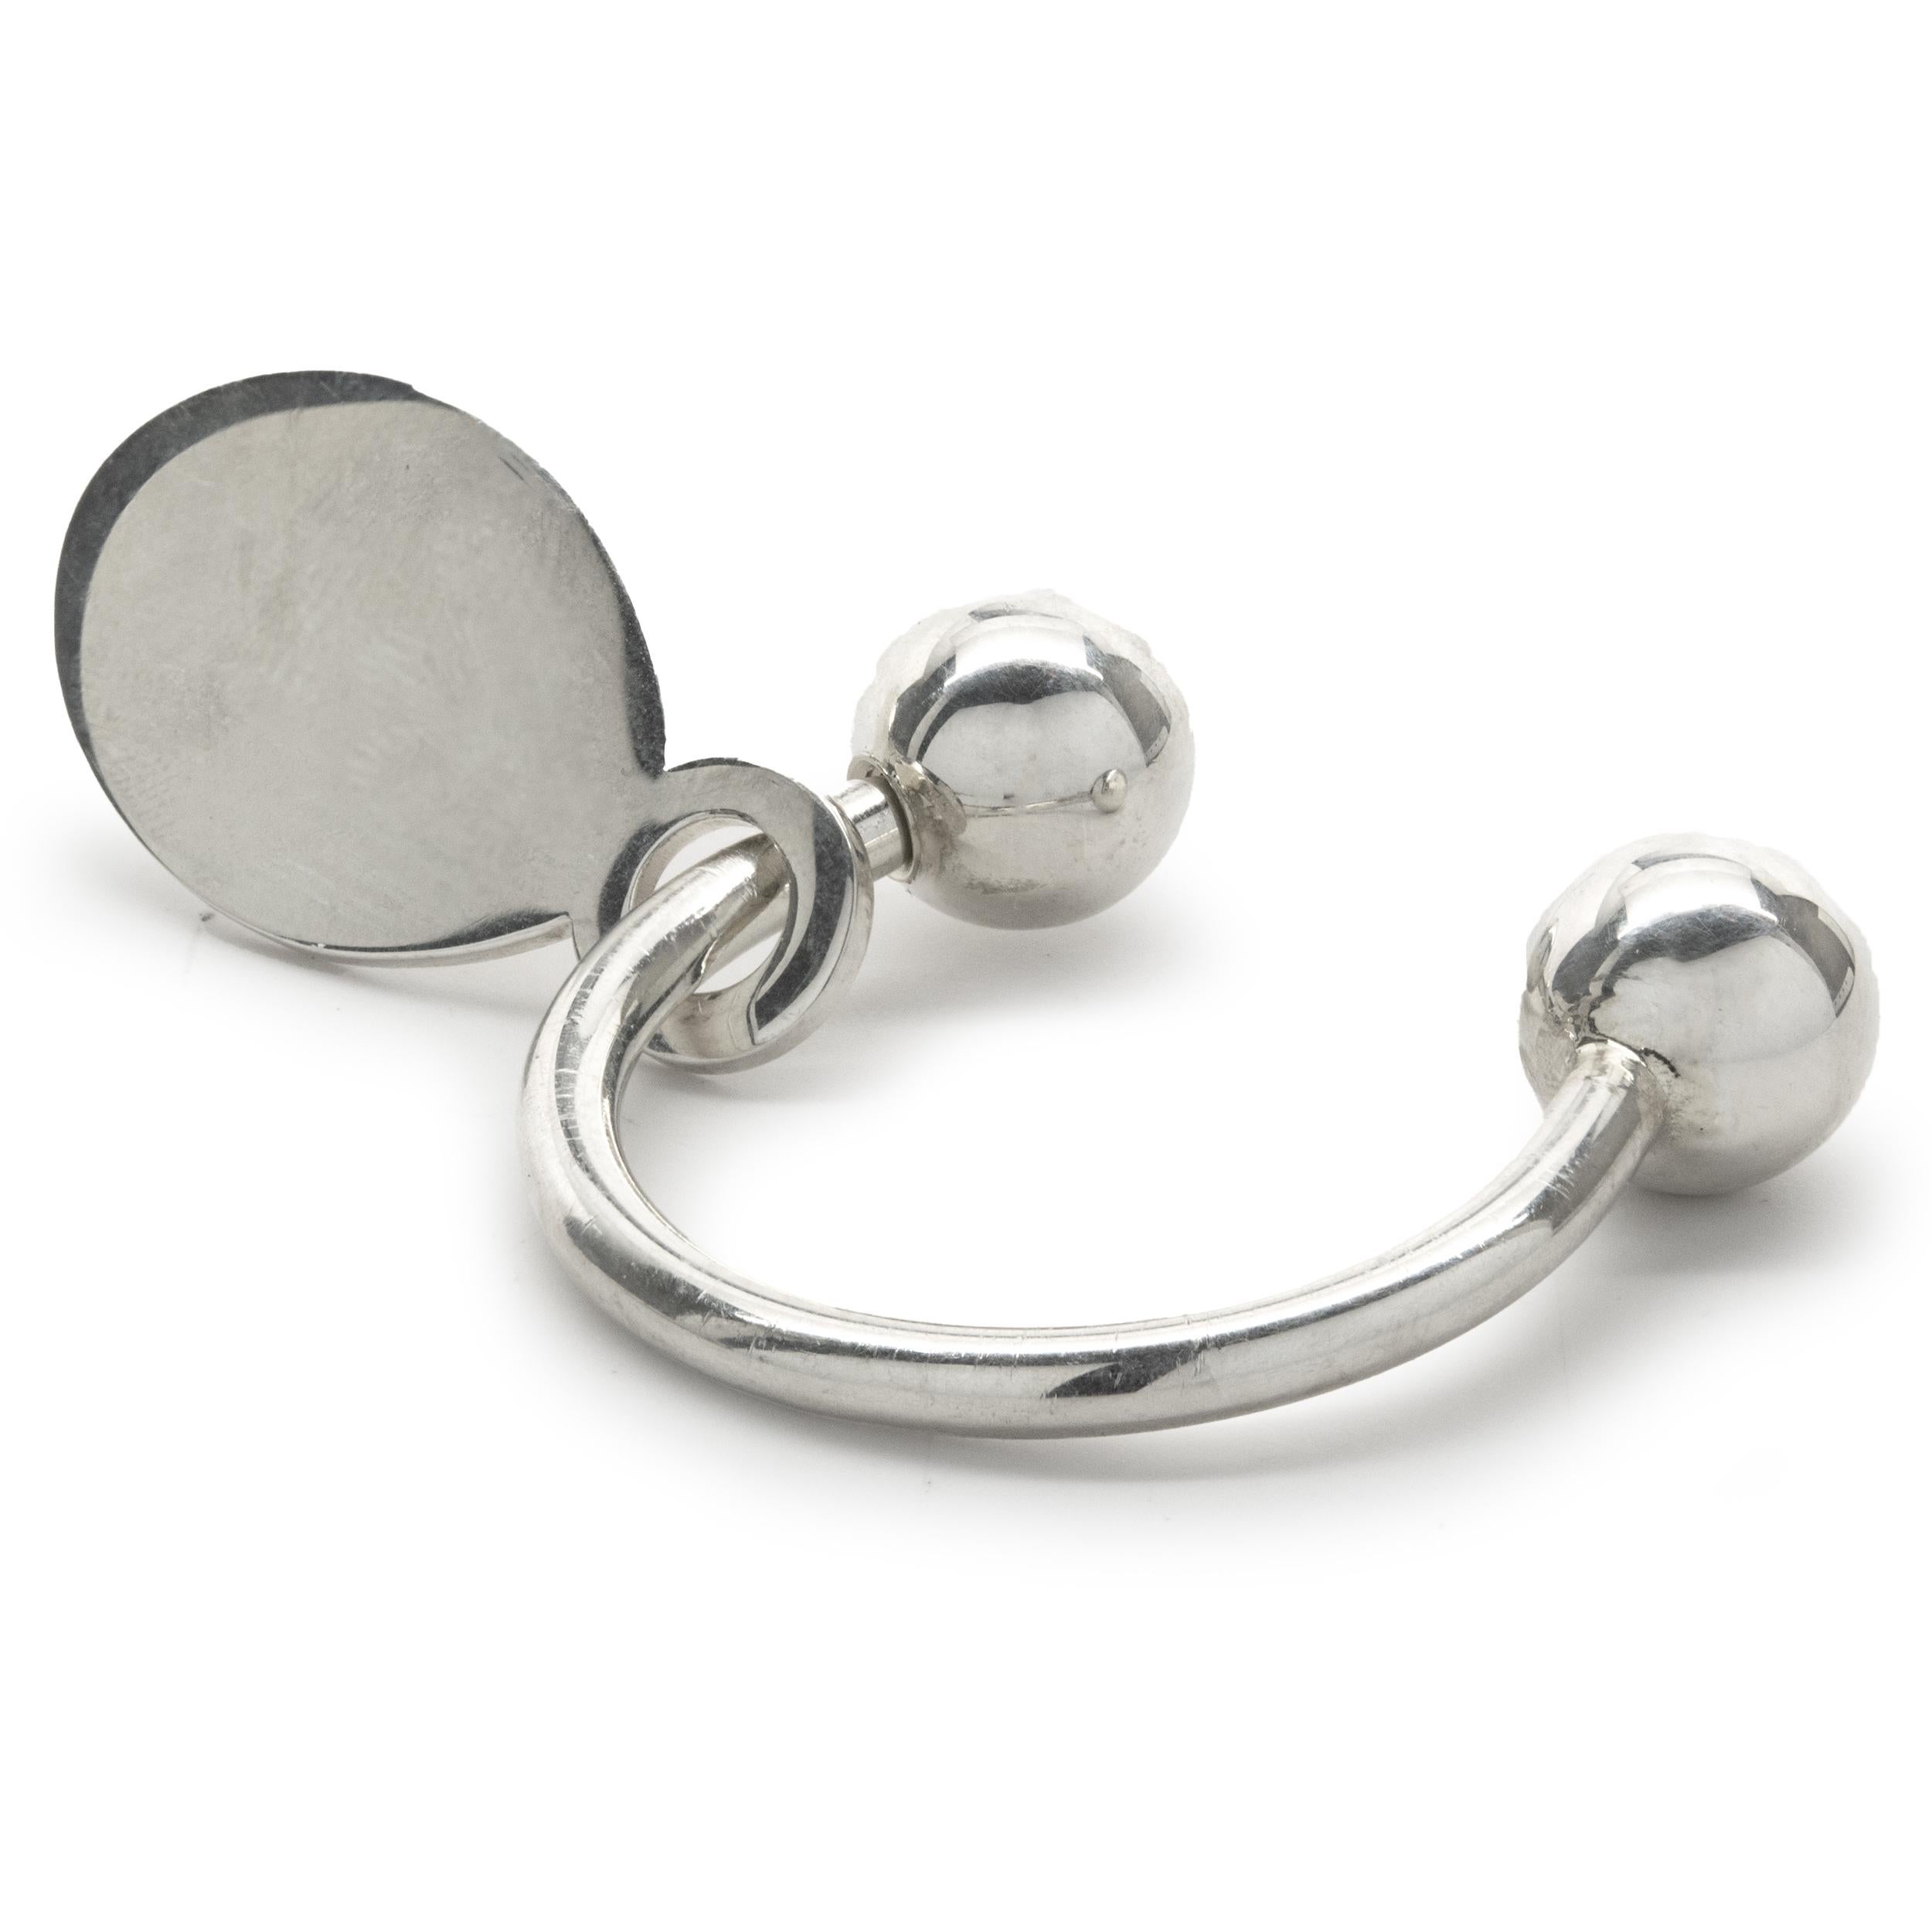 Designer: Tiffany & Co.
Material: Sterling Silver
Dimensions: key ring measures 55 x 30mm
Weight: 21.46 grams